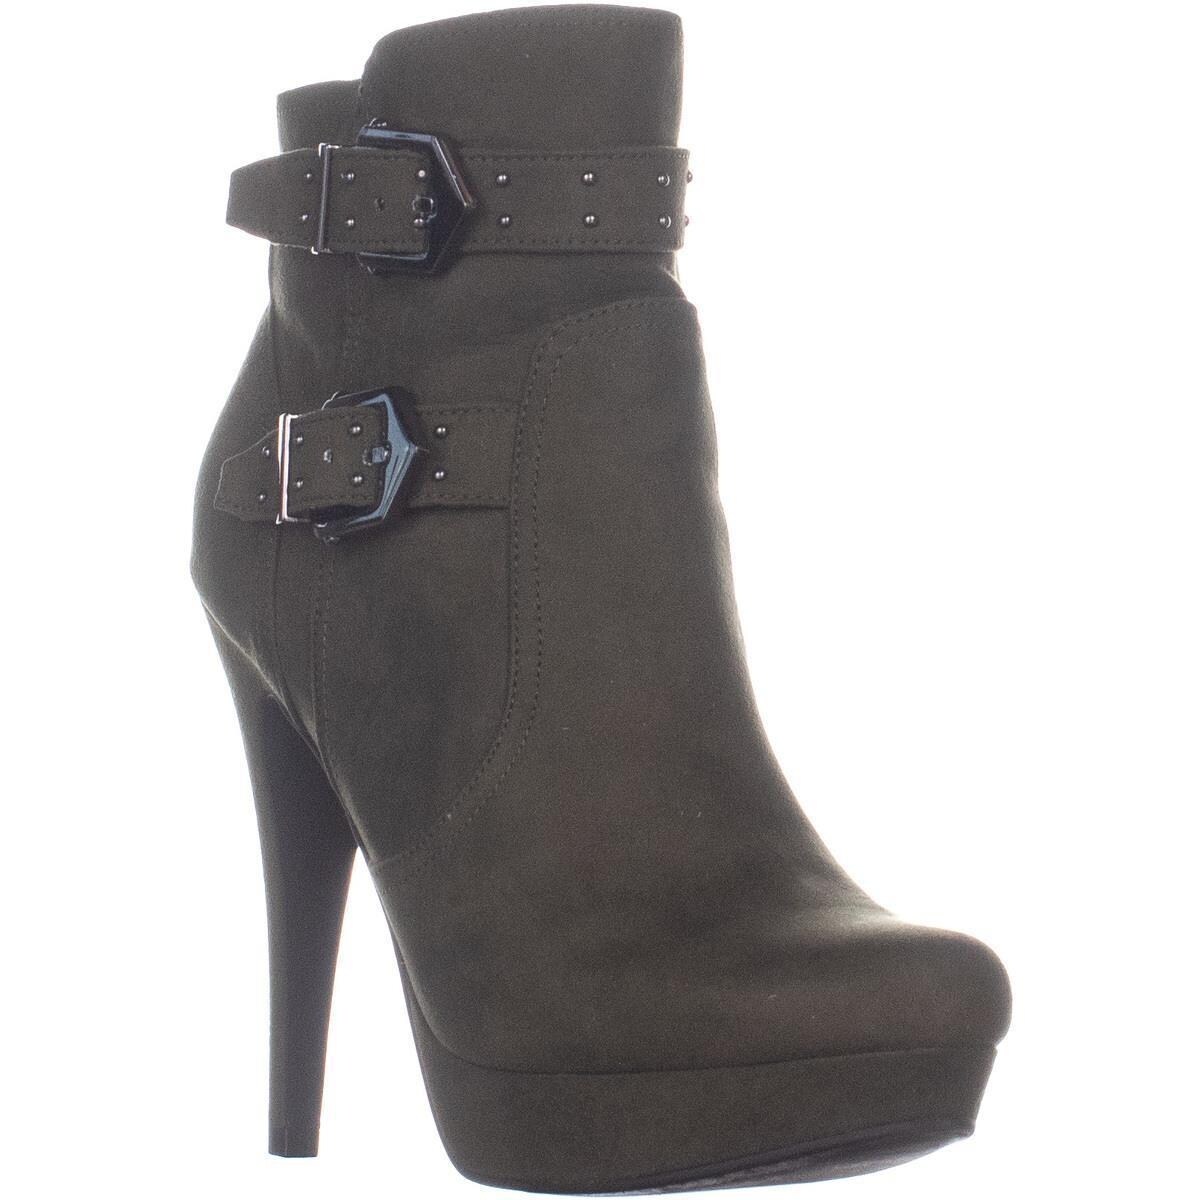 G by Guess Dalli2 Platform Ankle Boots 